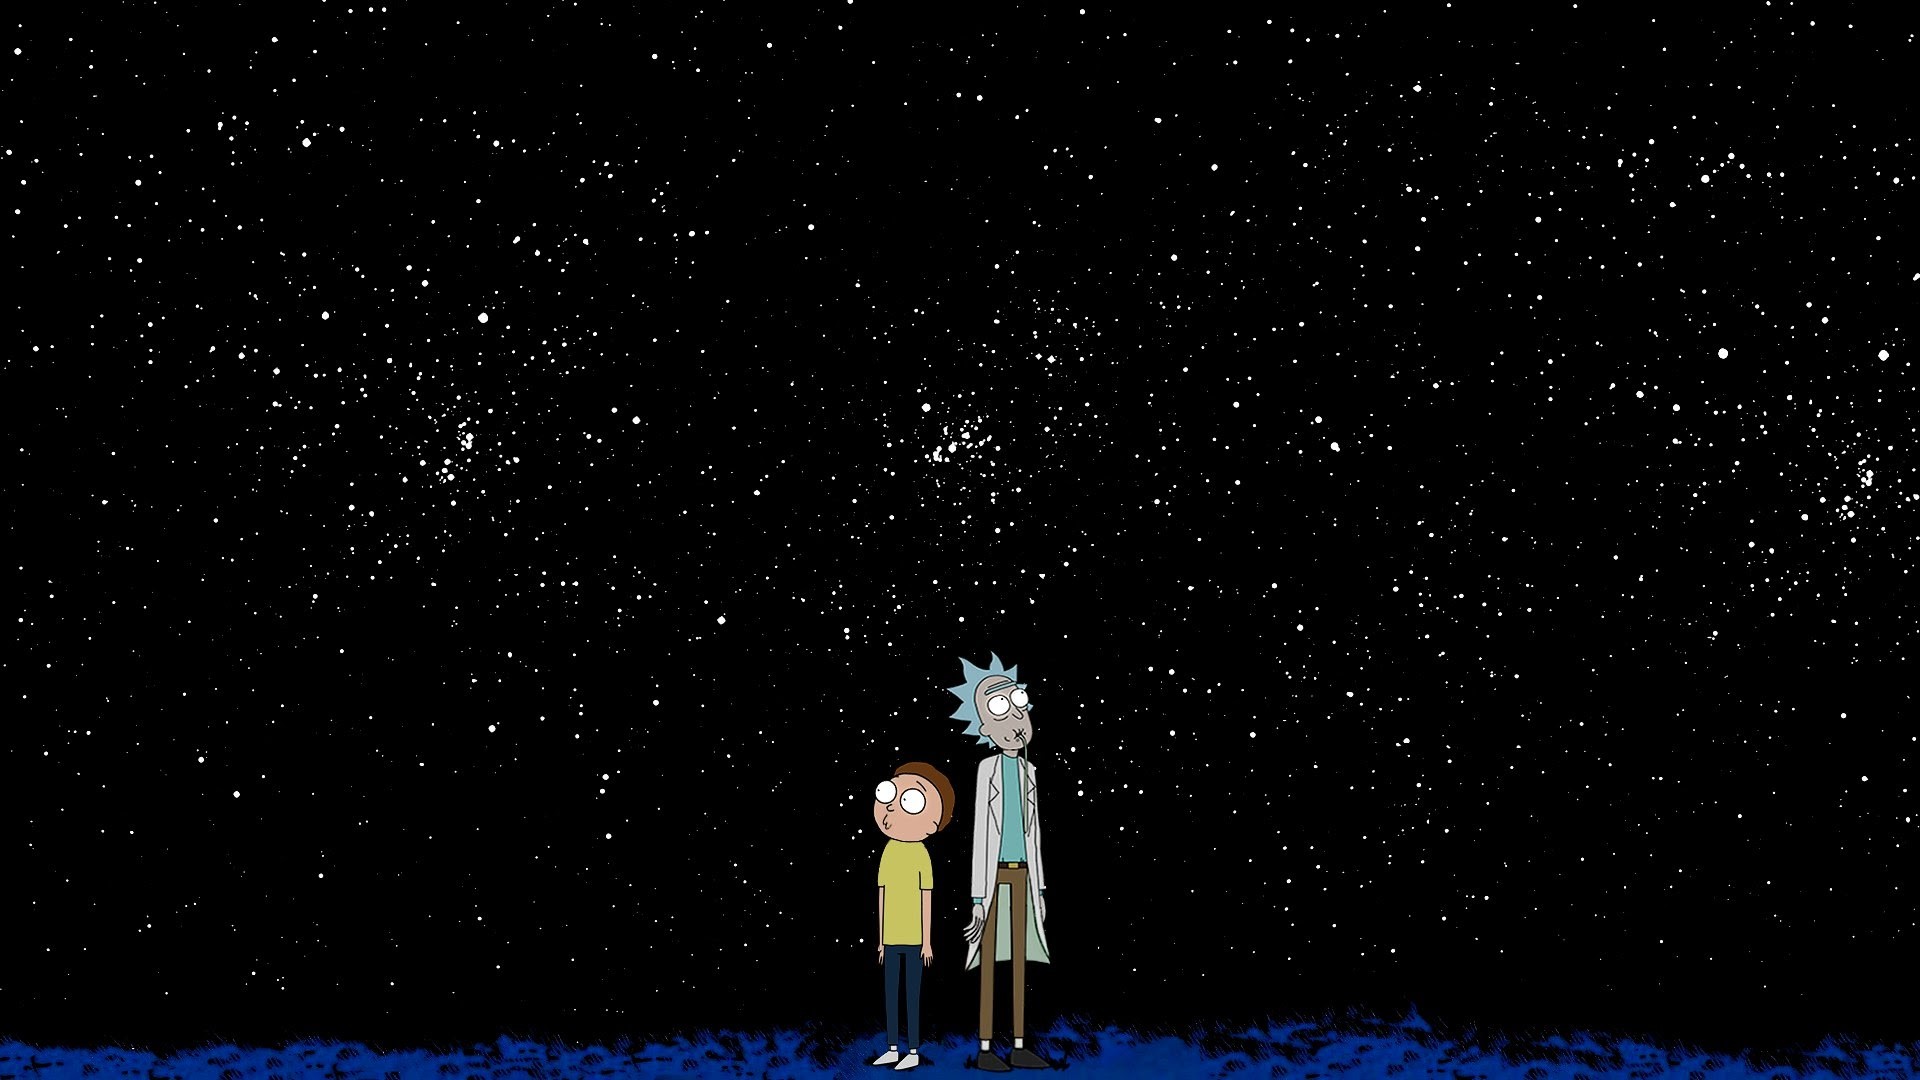 Best Rick and Morty Wallpaper | 2020